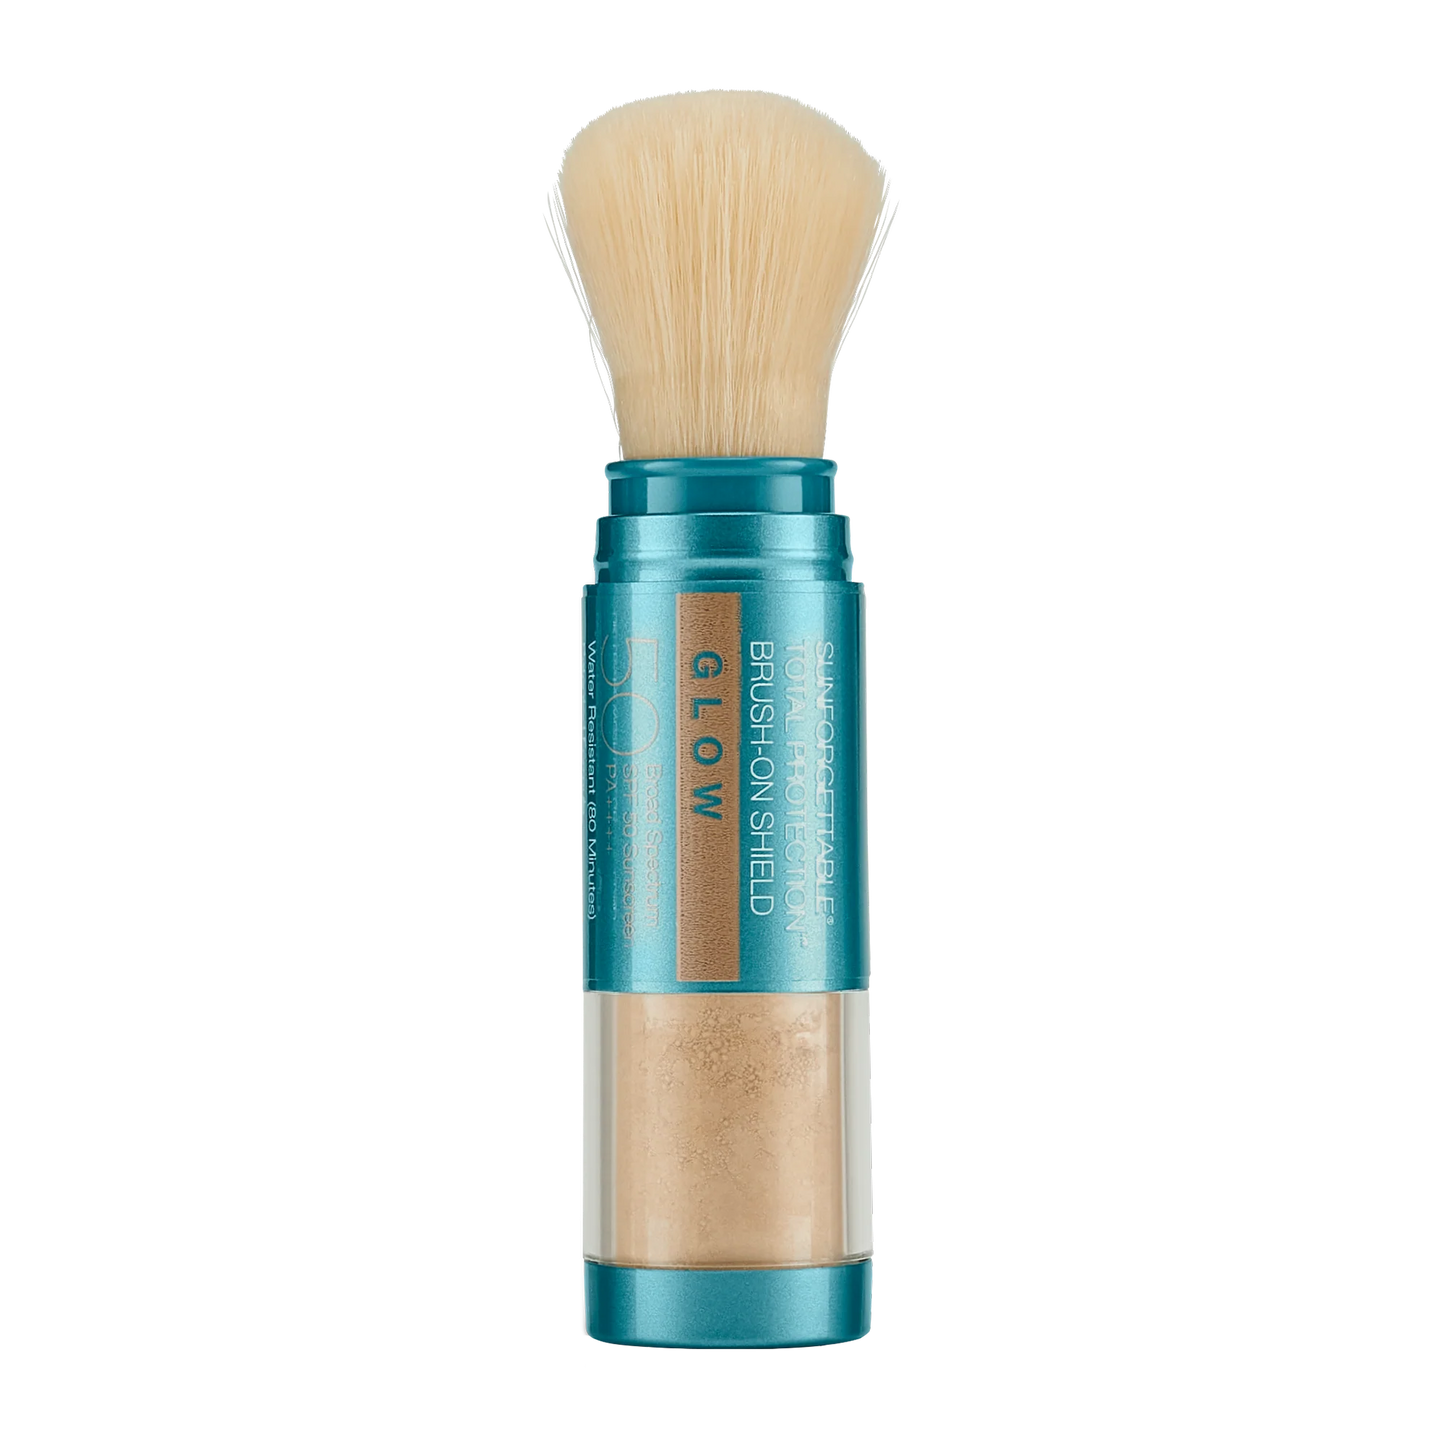 CS SPF 50 Total Protection Brush on Glow